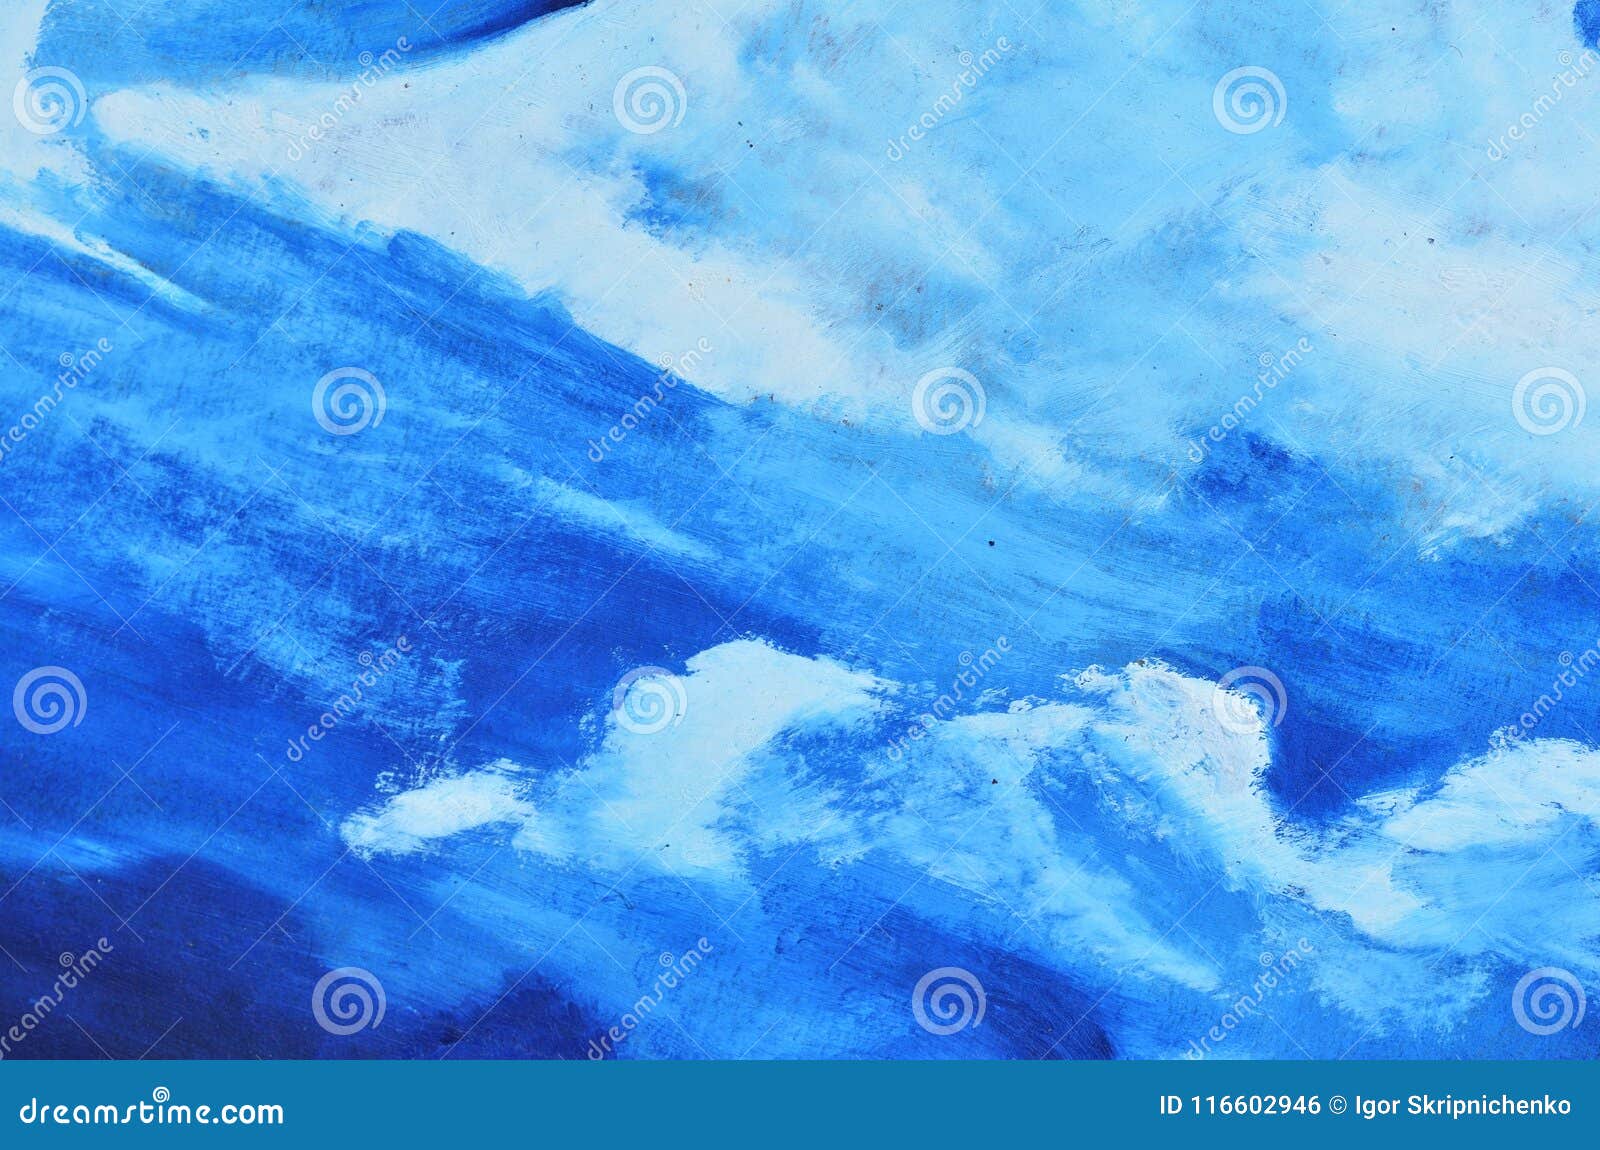 A Blue Sky with White Clouds is Painted with Watercolor Paint on